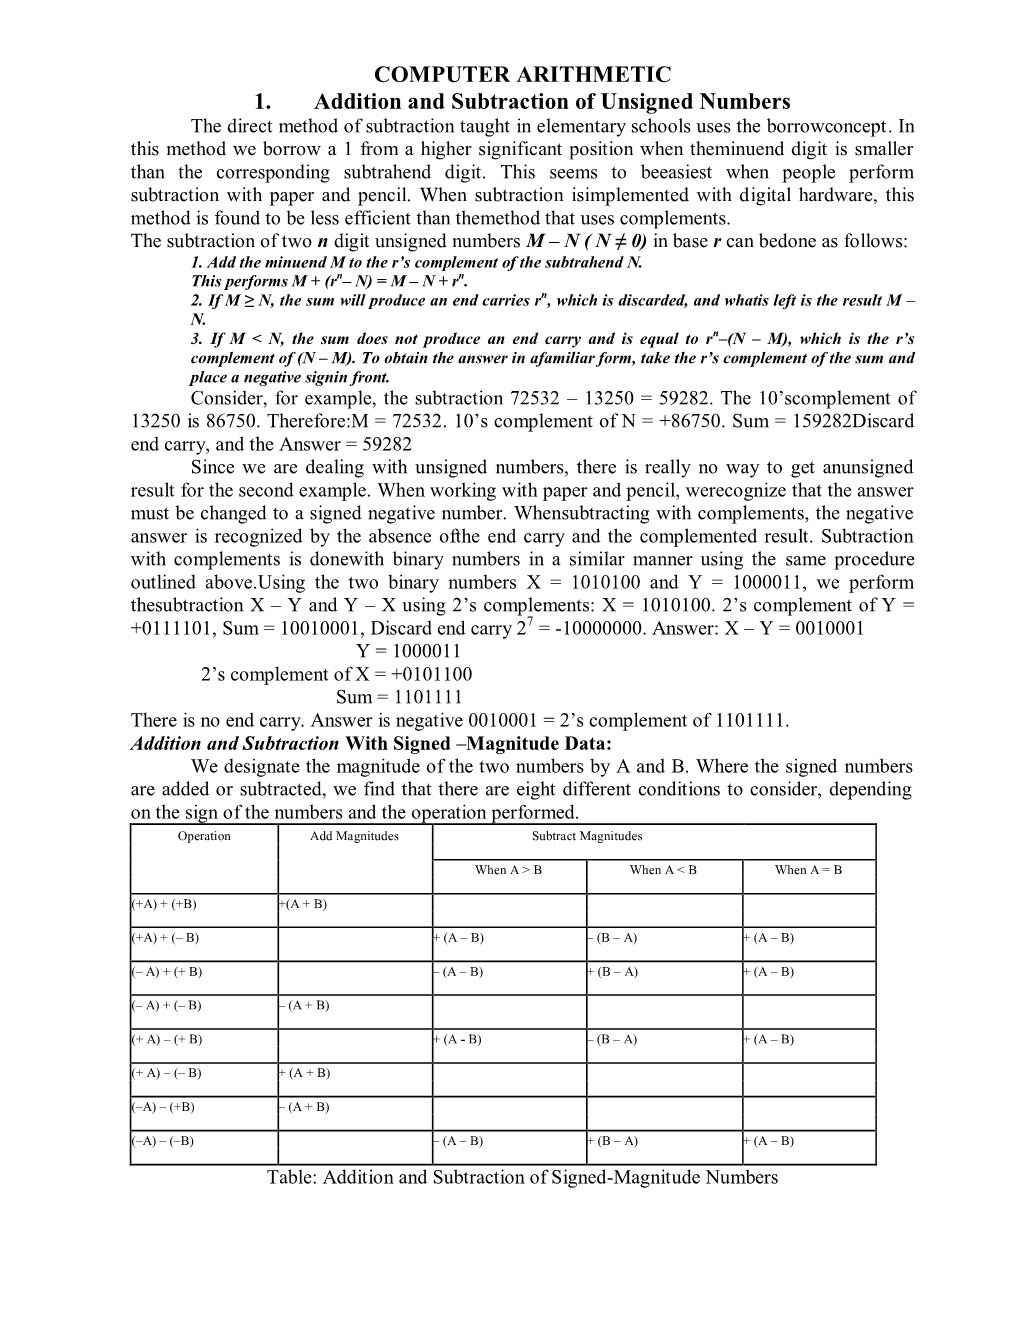 COMPUTER ARITHMETIC 1. Addition and Subtraction of Unsigned Numbers the Direct Method of Subtraction Taught in Elementary Schools Uses the Borrowconcept